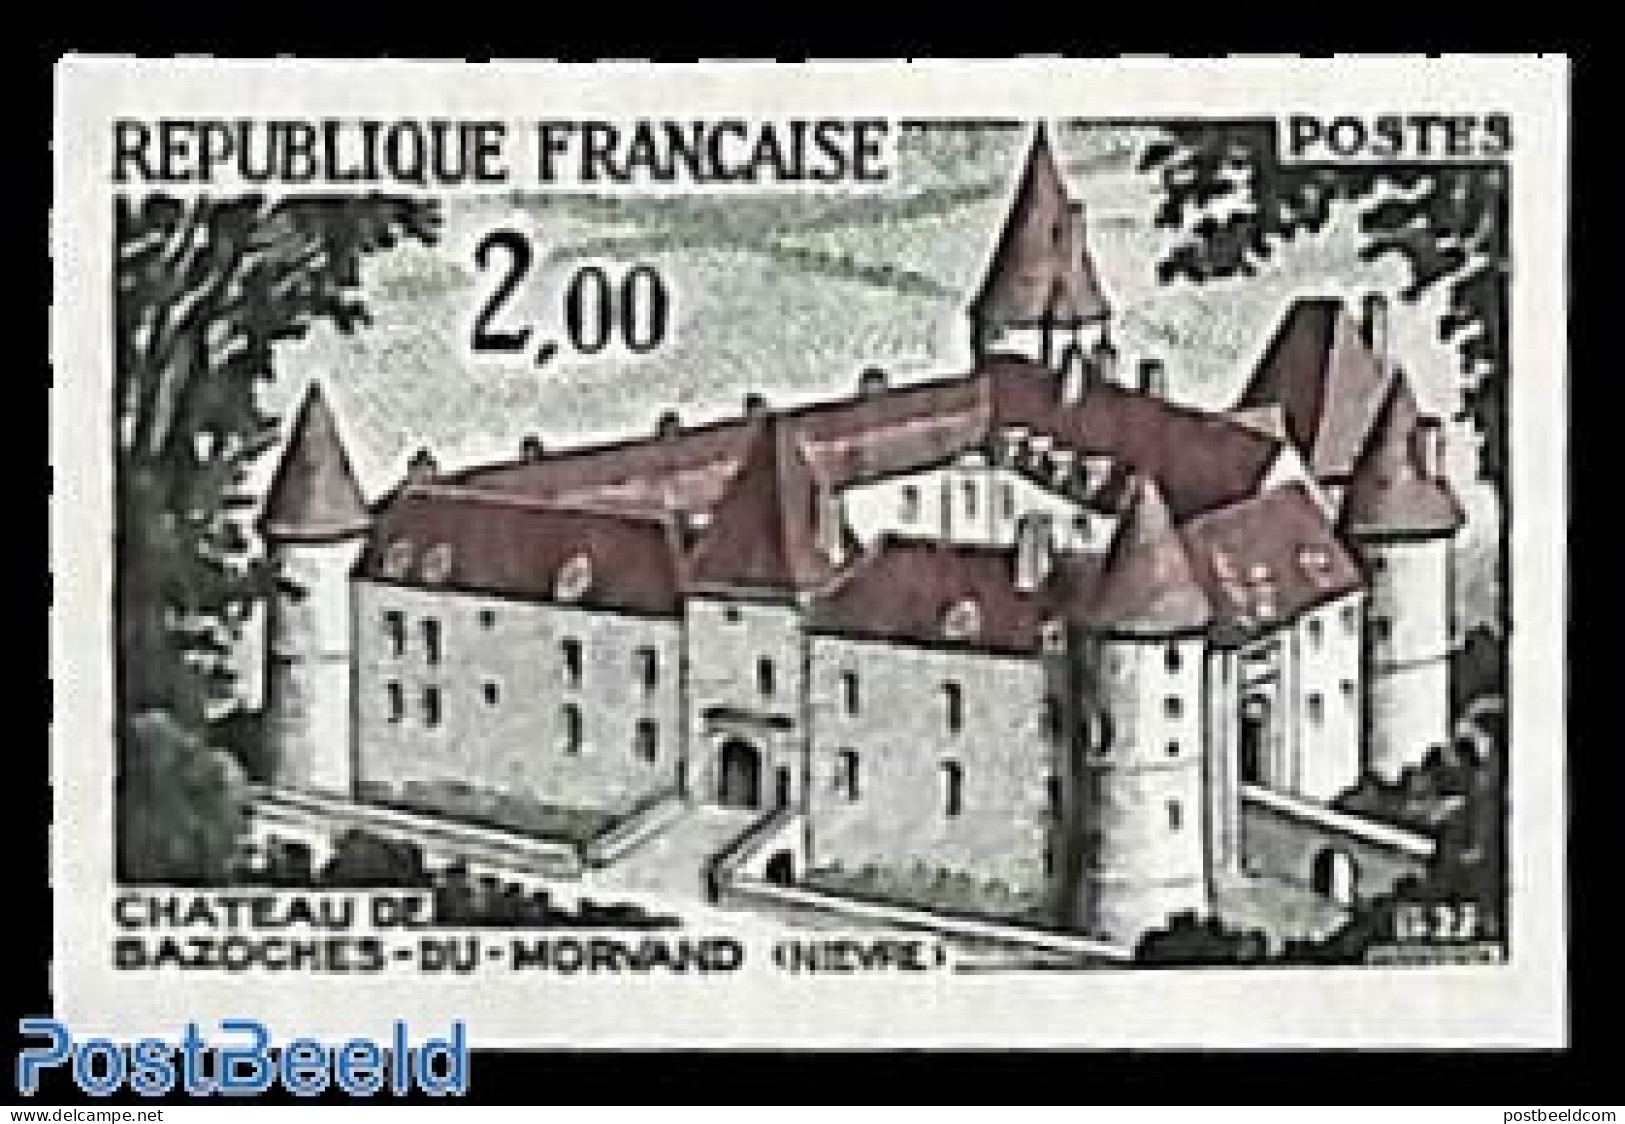 France 1972 Bazoches, Castle Of Vauban 1v, Imperforated, Mint NH, Art - Architects - Castles & Fortifications - Neufs